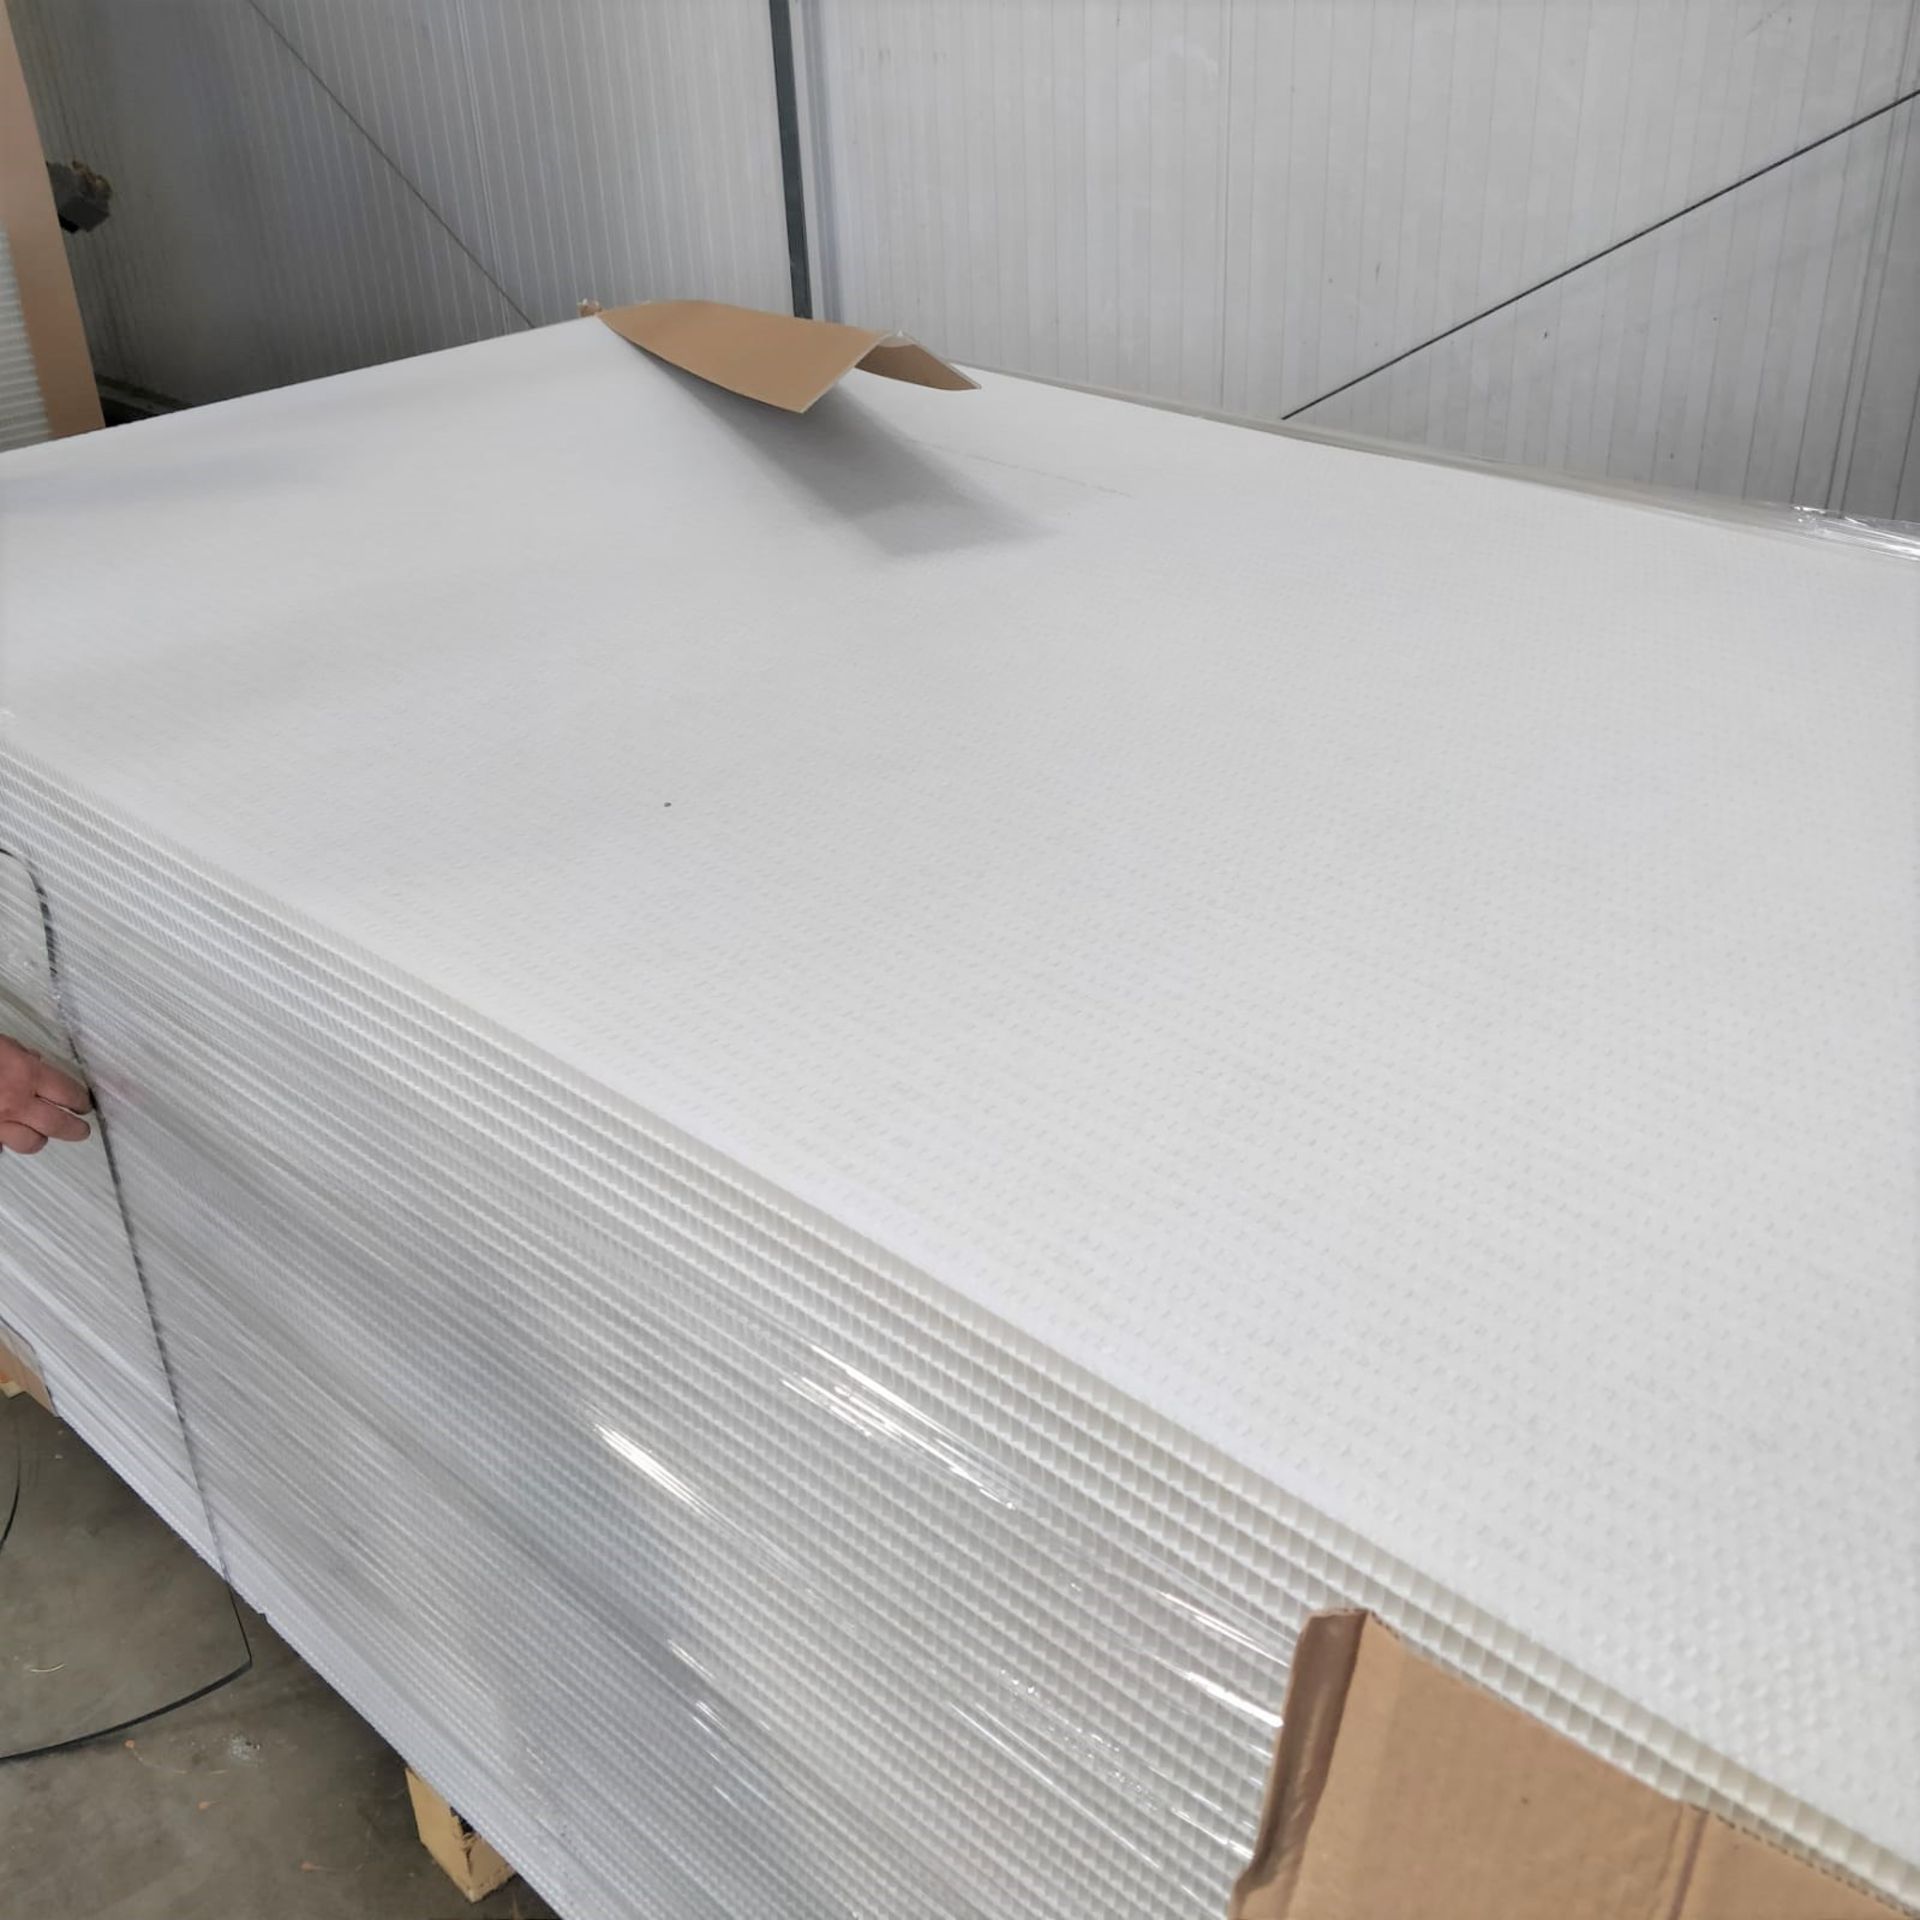 24 x ThermHex Thermoplastic Honeycomb Core Panels - Size Approx 2630 x 1210 x 18mm - New Stock - - Image 3 of 6